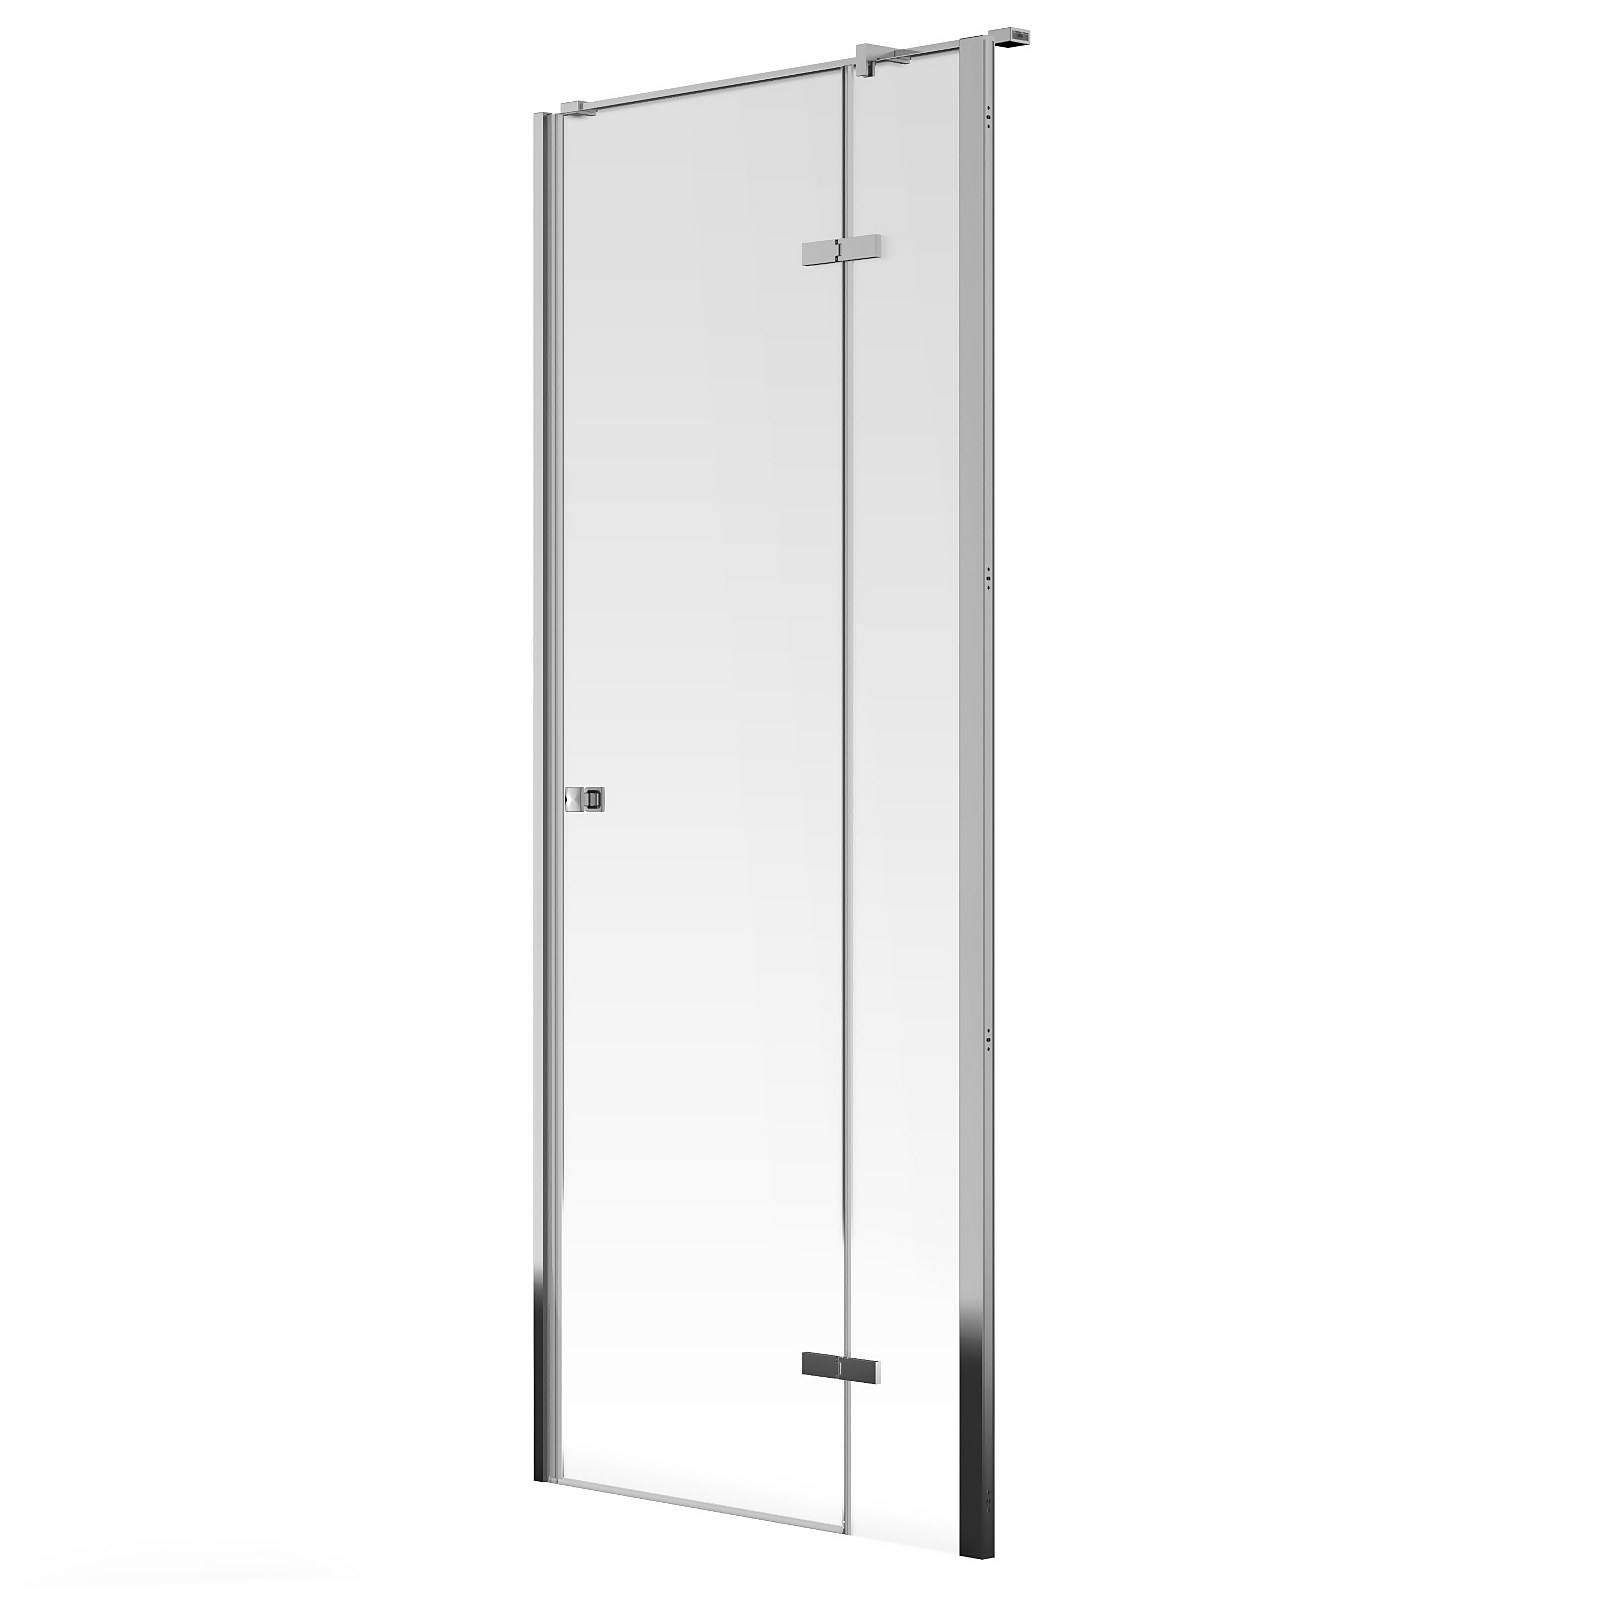 Photo of Bathstore Pearl 900mm Hinged Shower Glass Door - Right Hand